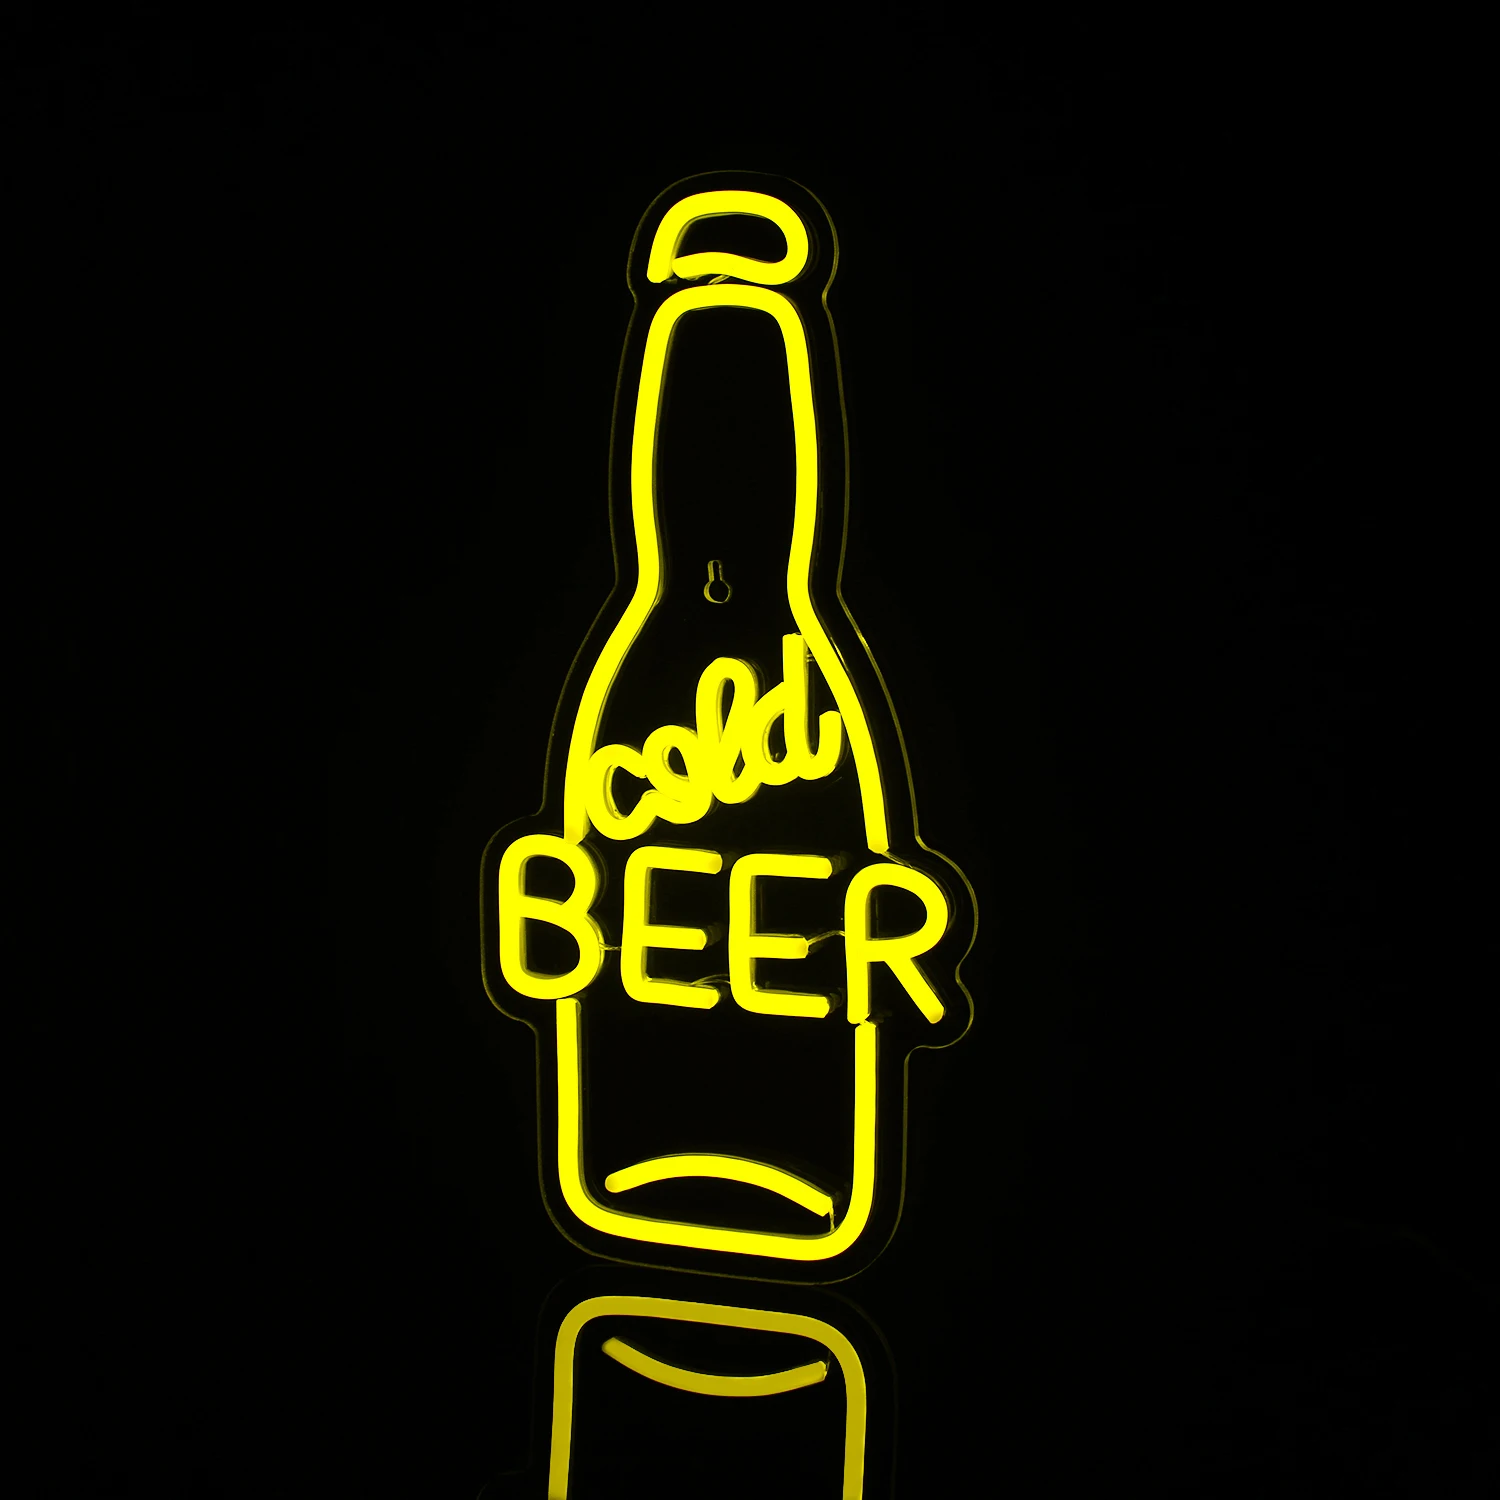 

Beer Neon Signs Beer Signs Yellow Neon Lights Wall Decor for Man Cave Bar Nightclub Beach Store Holiday Party Decor Neon